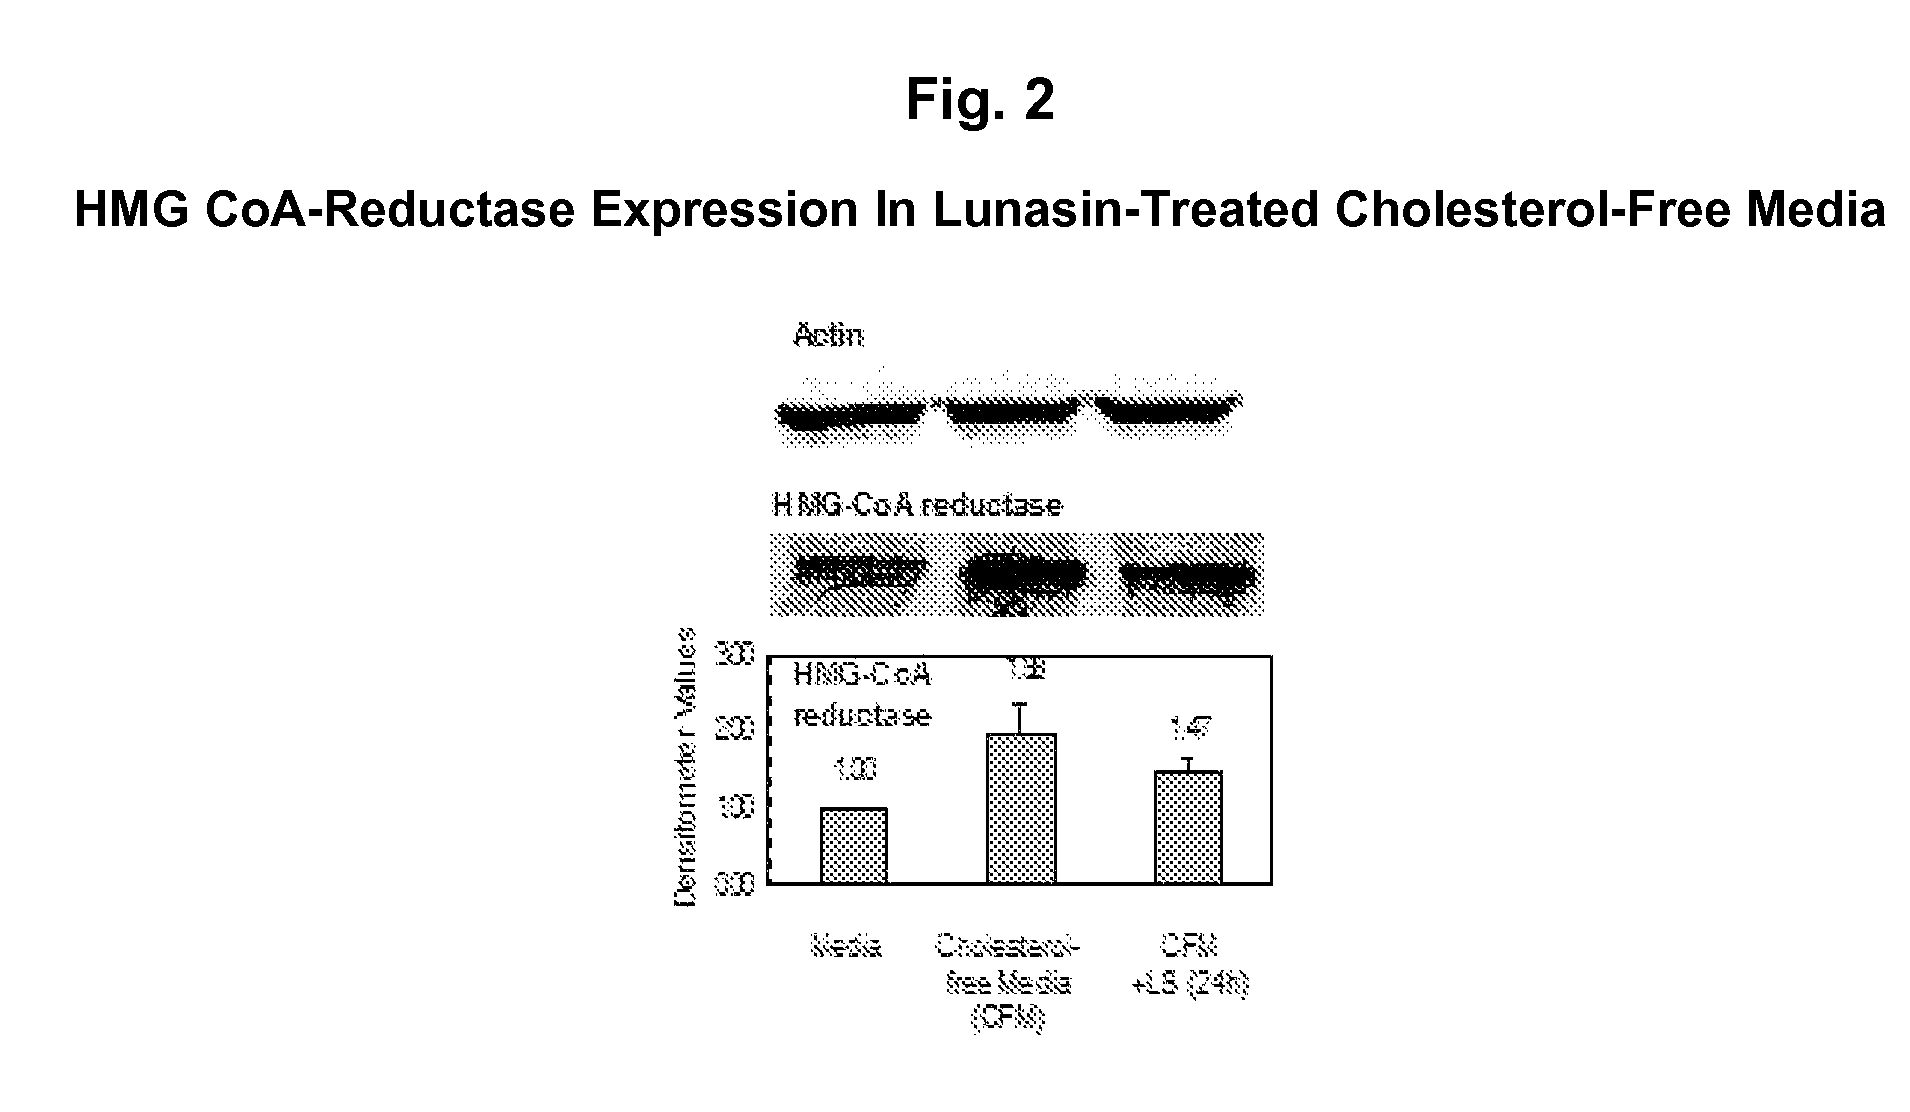 Methods for using soy peptides to inhibit H3 acetylation, reduce expression of HMG CoA reductase, and increase LDL receptor and Sp1 expression in a mammal